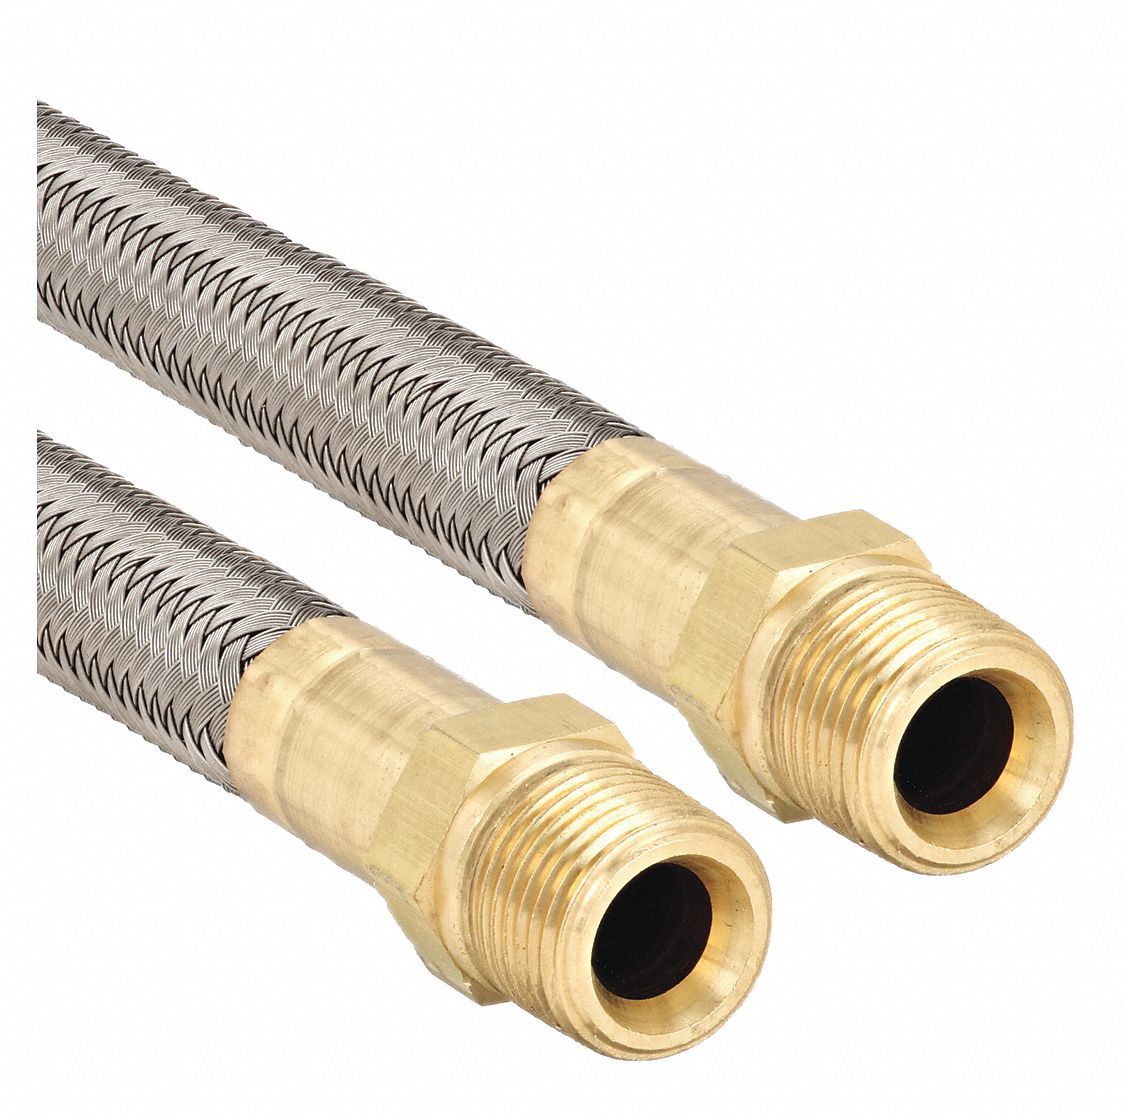  Braided Brass Oil Line Fuel Hose By The Foot, 5/16